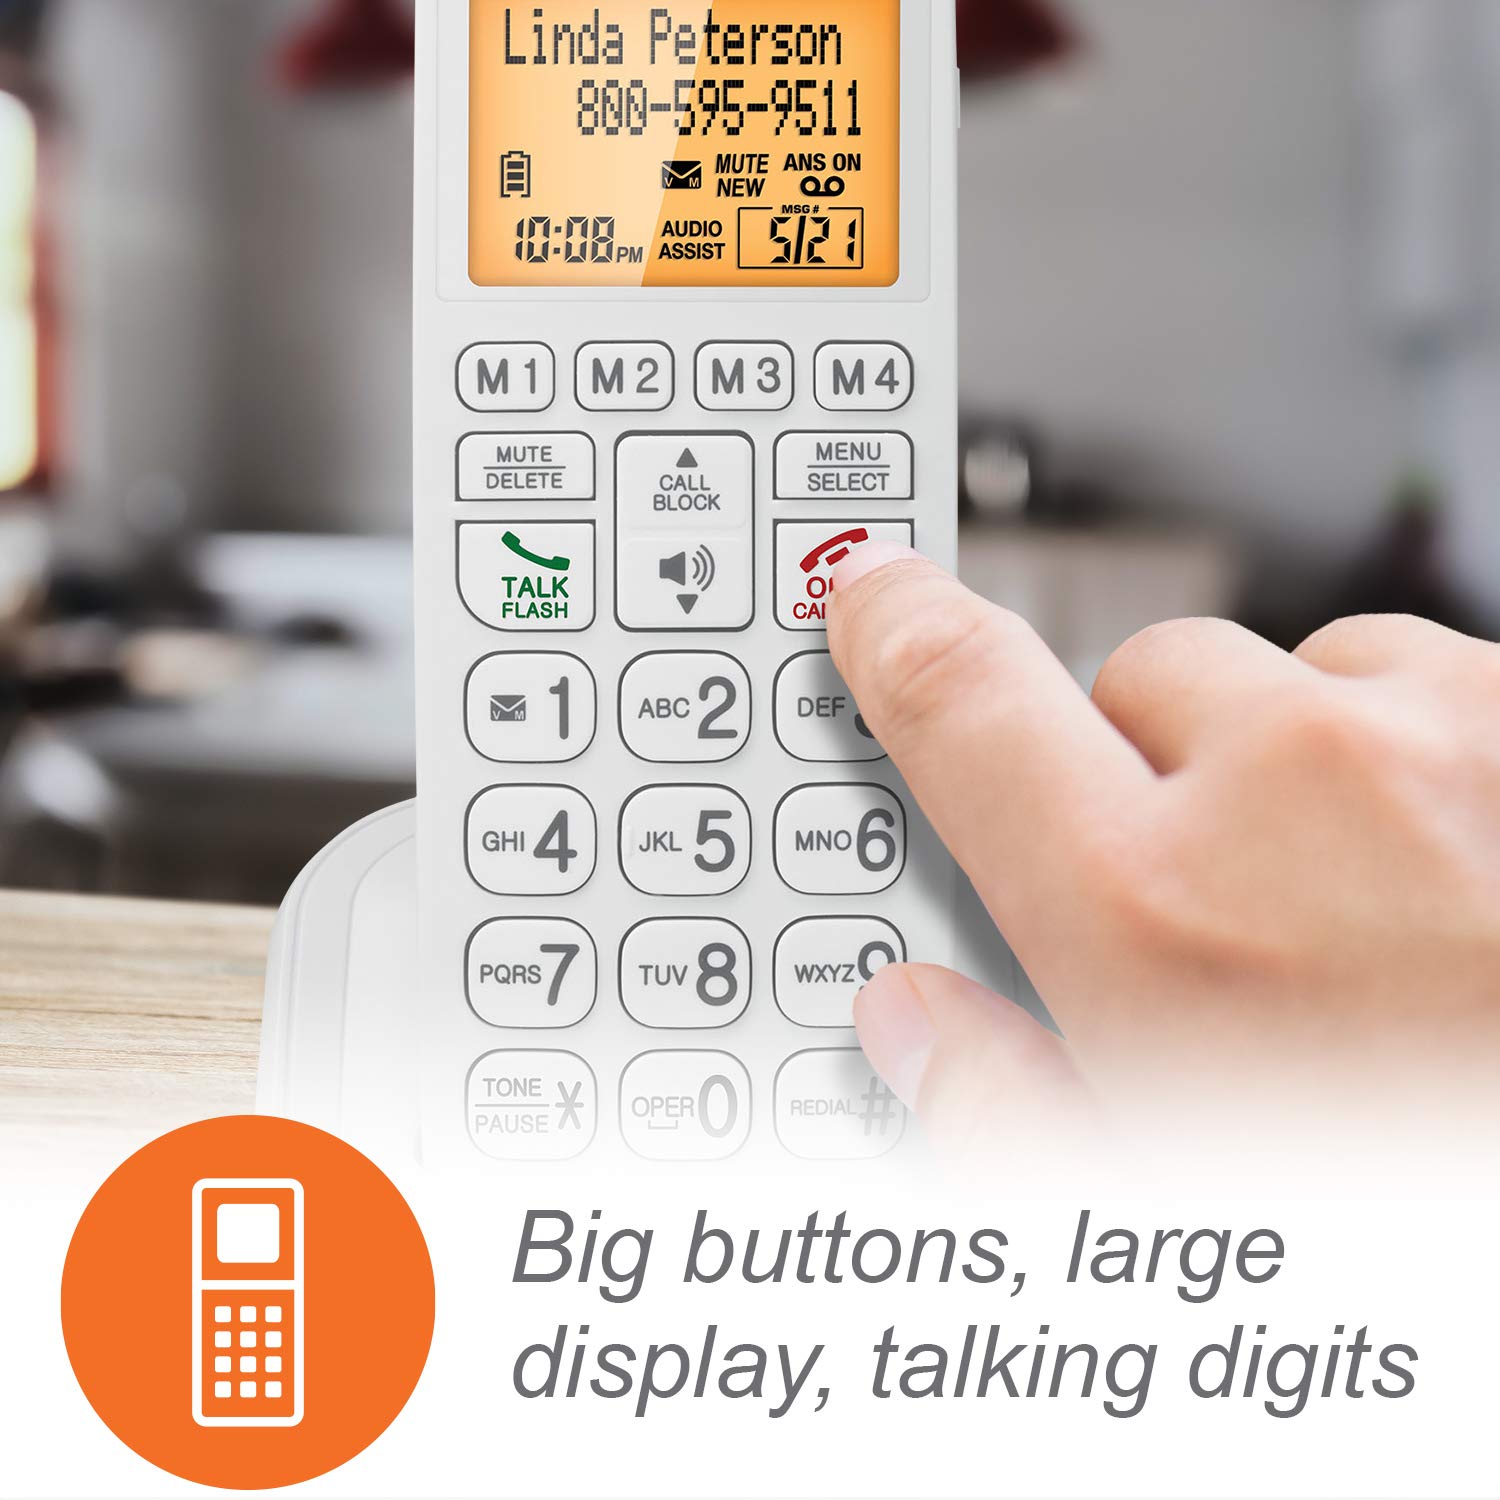 VTech SN5147 Amplified Corded/Cordless Senior Phone with Answering Machine, Call Blocking, 90dB Extra-loud Visual Ringer, One-touch Audio Assist on Handset up to 50dB, White